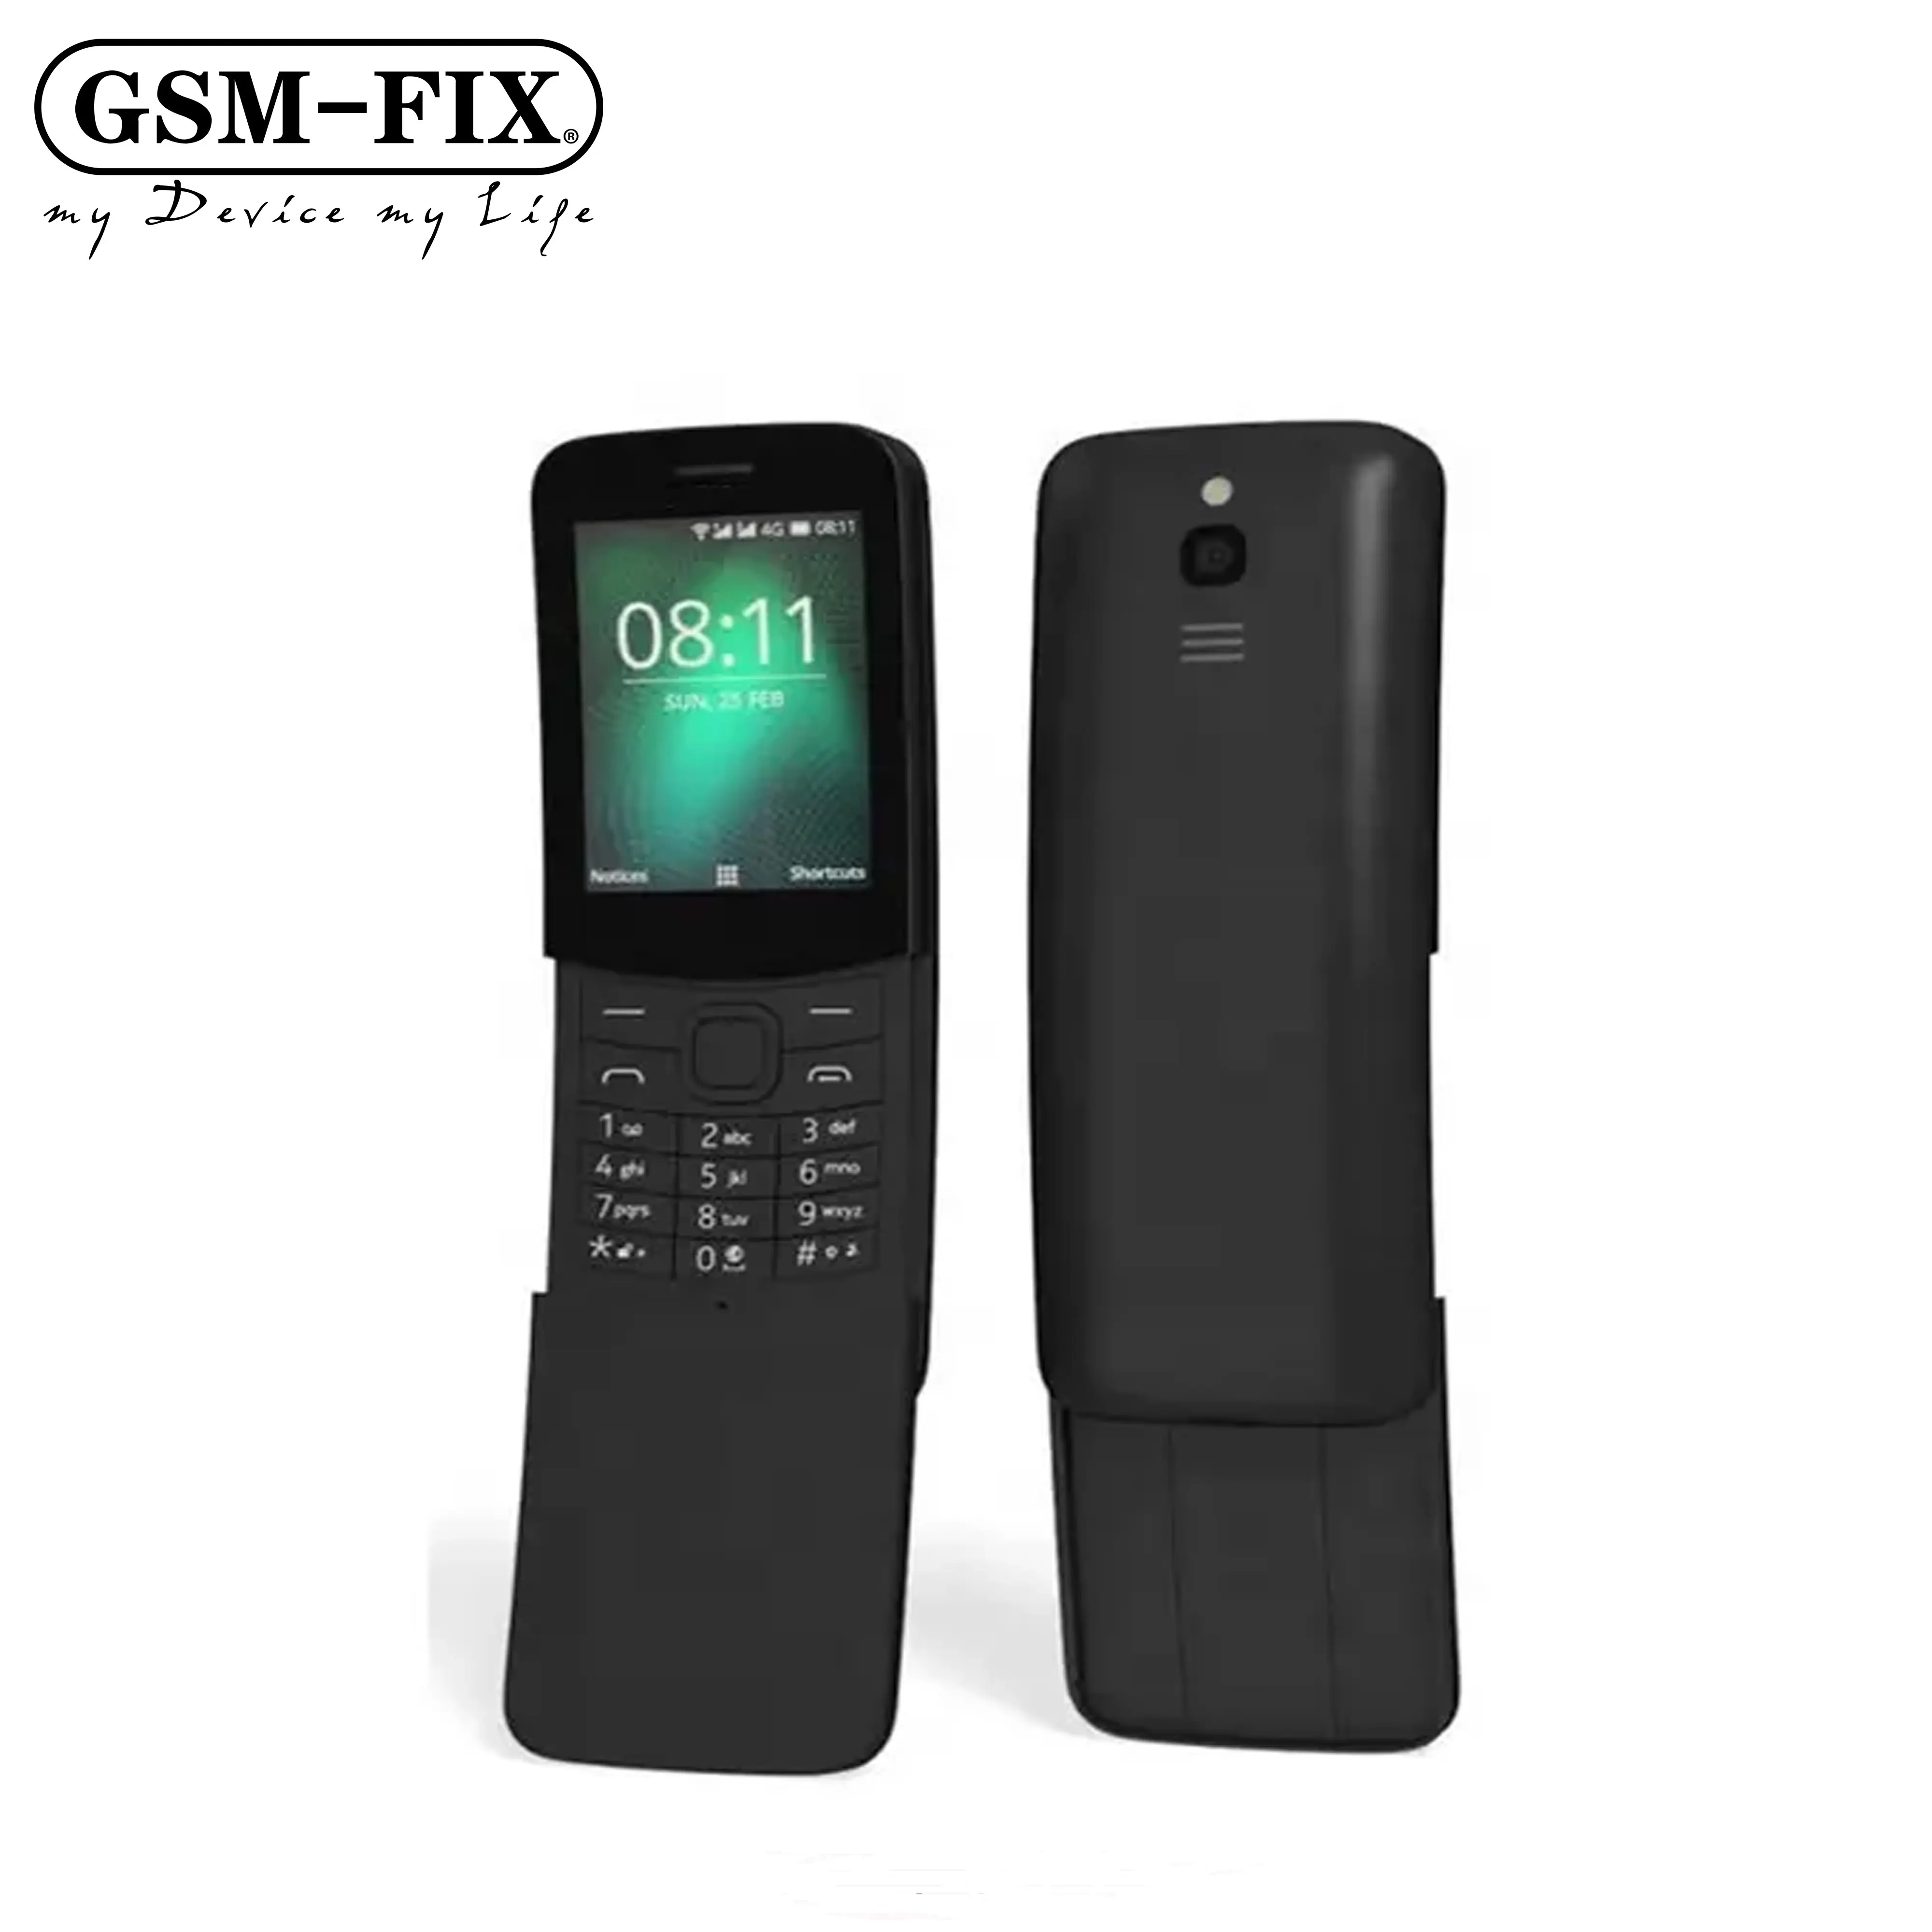 GSM-FIX For Nokia 8110 4G Best Buy Original Factory Unlocked Super Cheap Classic Slider Mobile Cell Phone